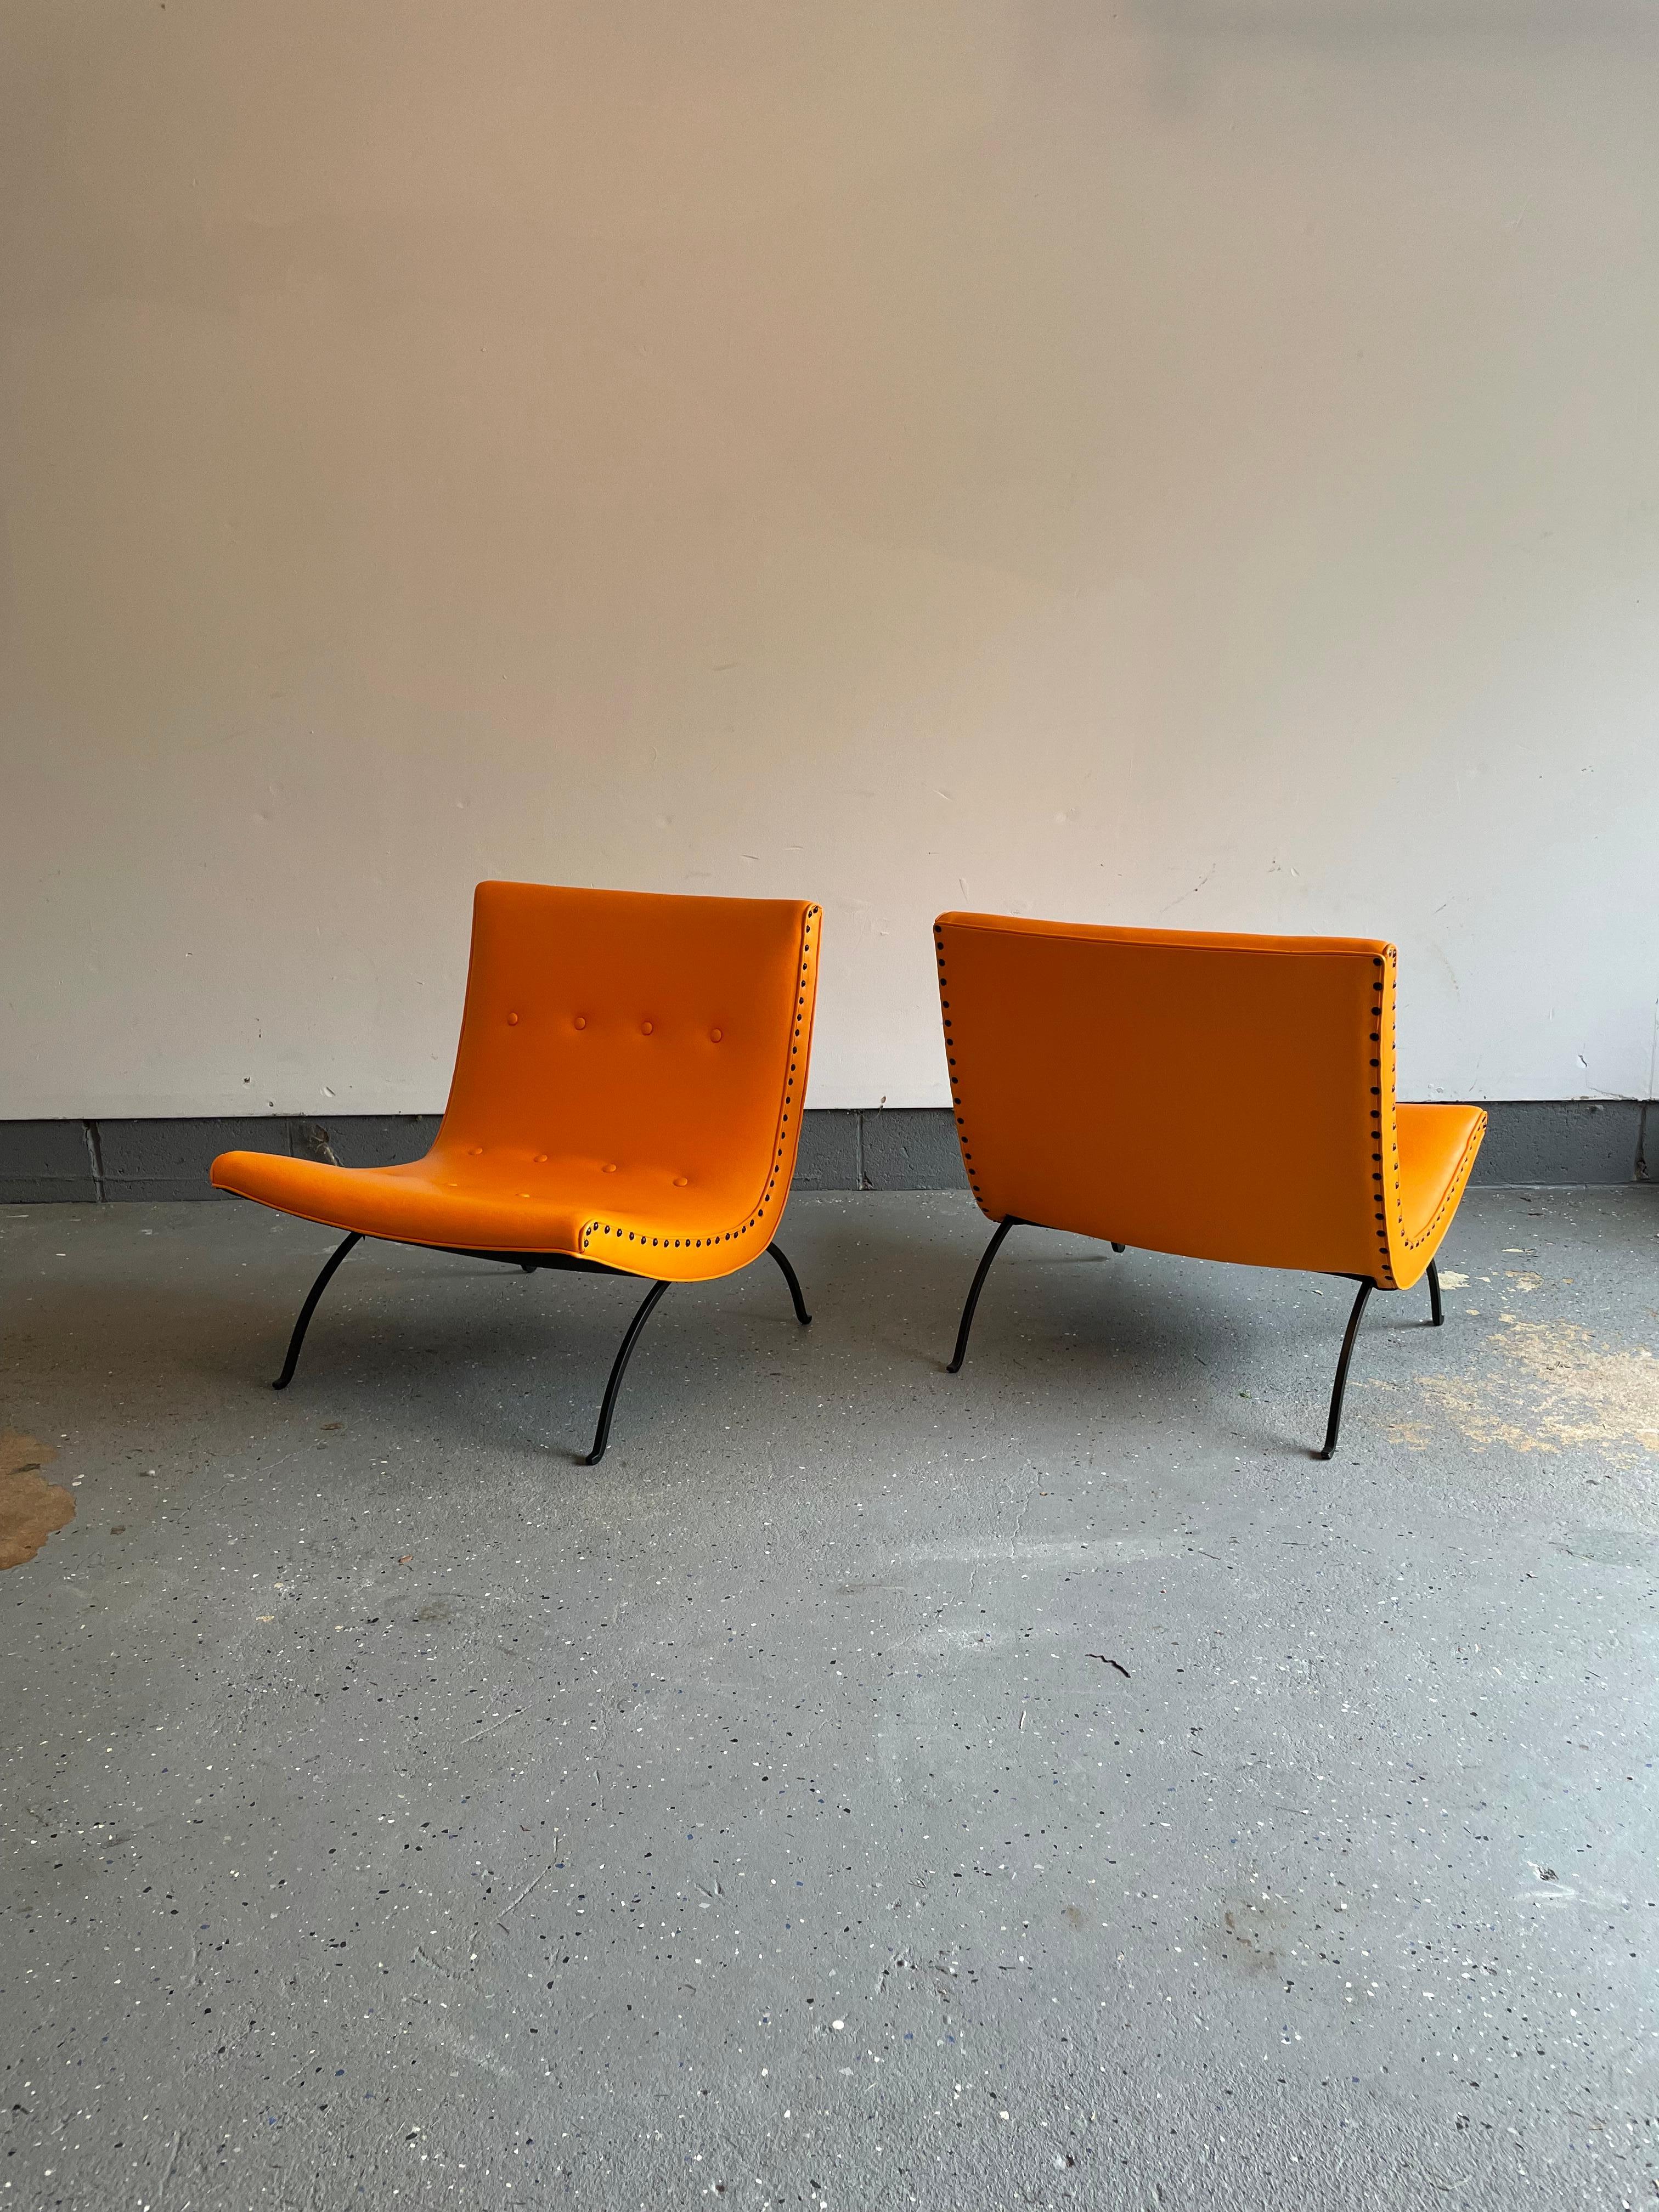 Rare pair of lounge chairs designed by Milo Baughman for James Mfg. Chairs were reupholstered about a year ago in an orange vinyl and saw light use since then. Chairs come with an original tag that was affixed to the underside of one of the chairs.